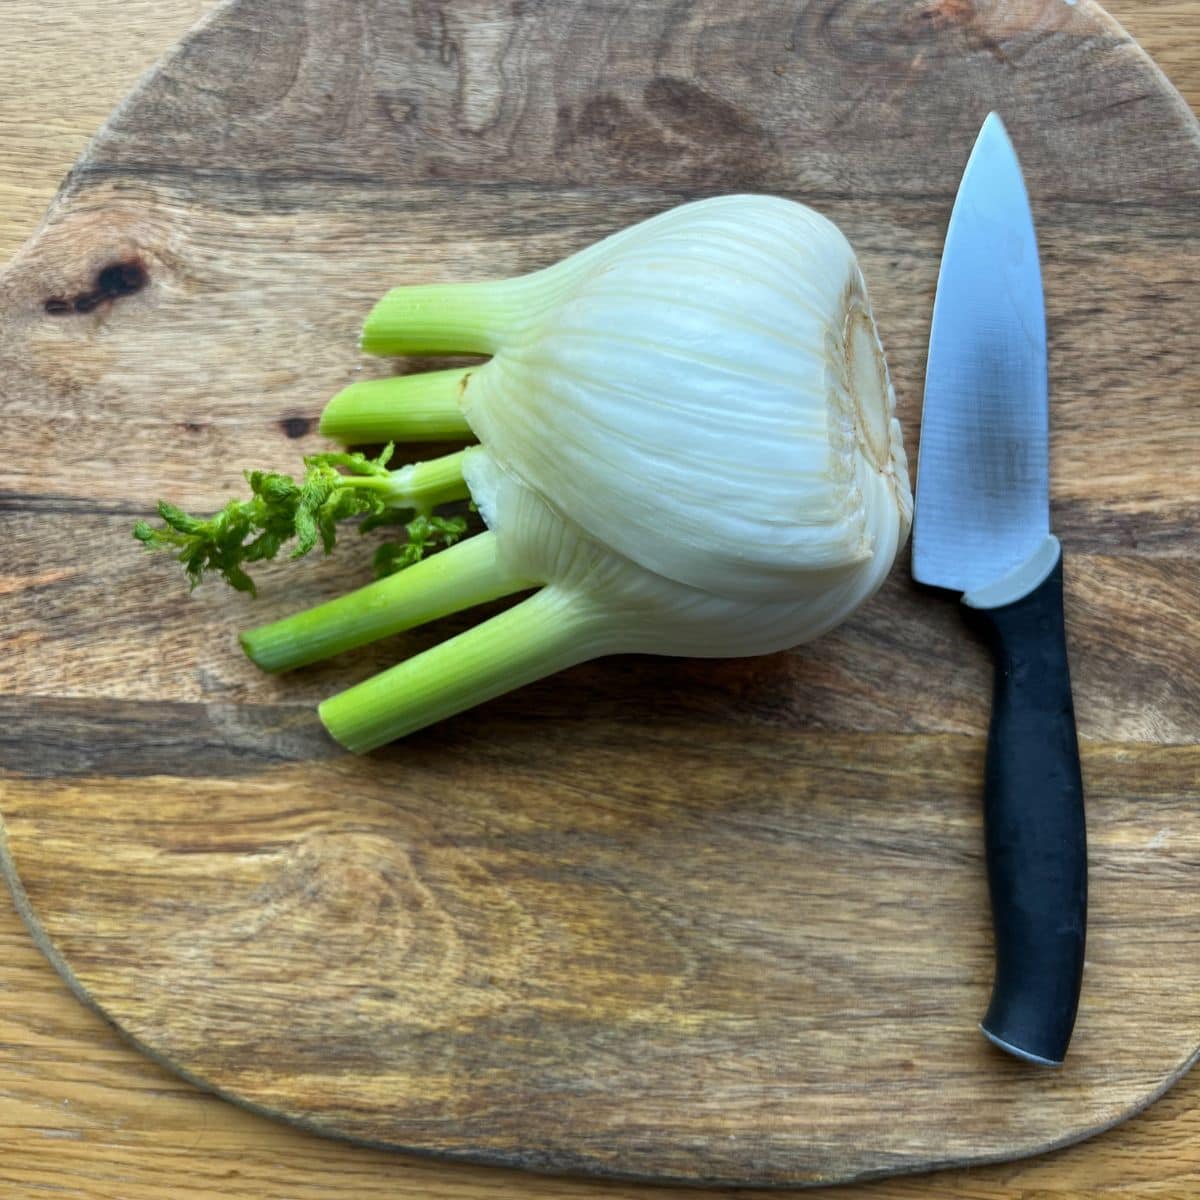 Full fennel on wooden chopping board with knife.